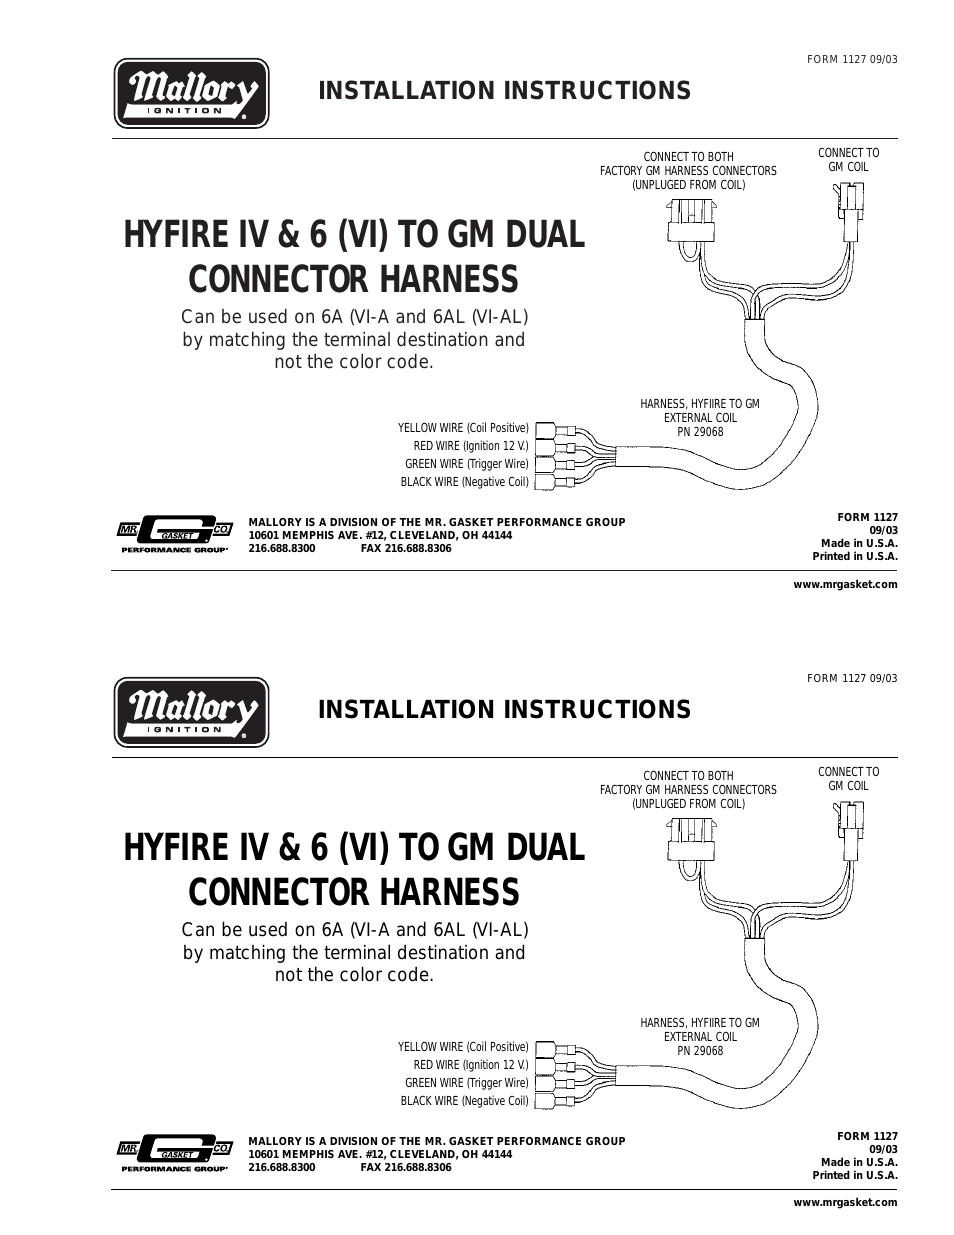 Mallory HYFIRE IV & 6 (VI) TO GM DUAL CONNECTOR HARNESS 29068